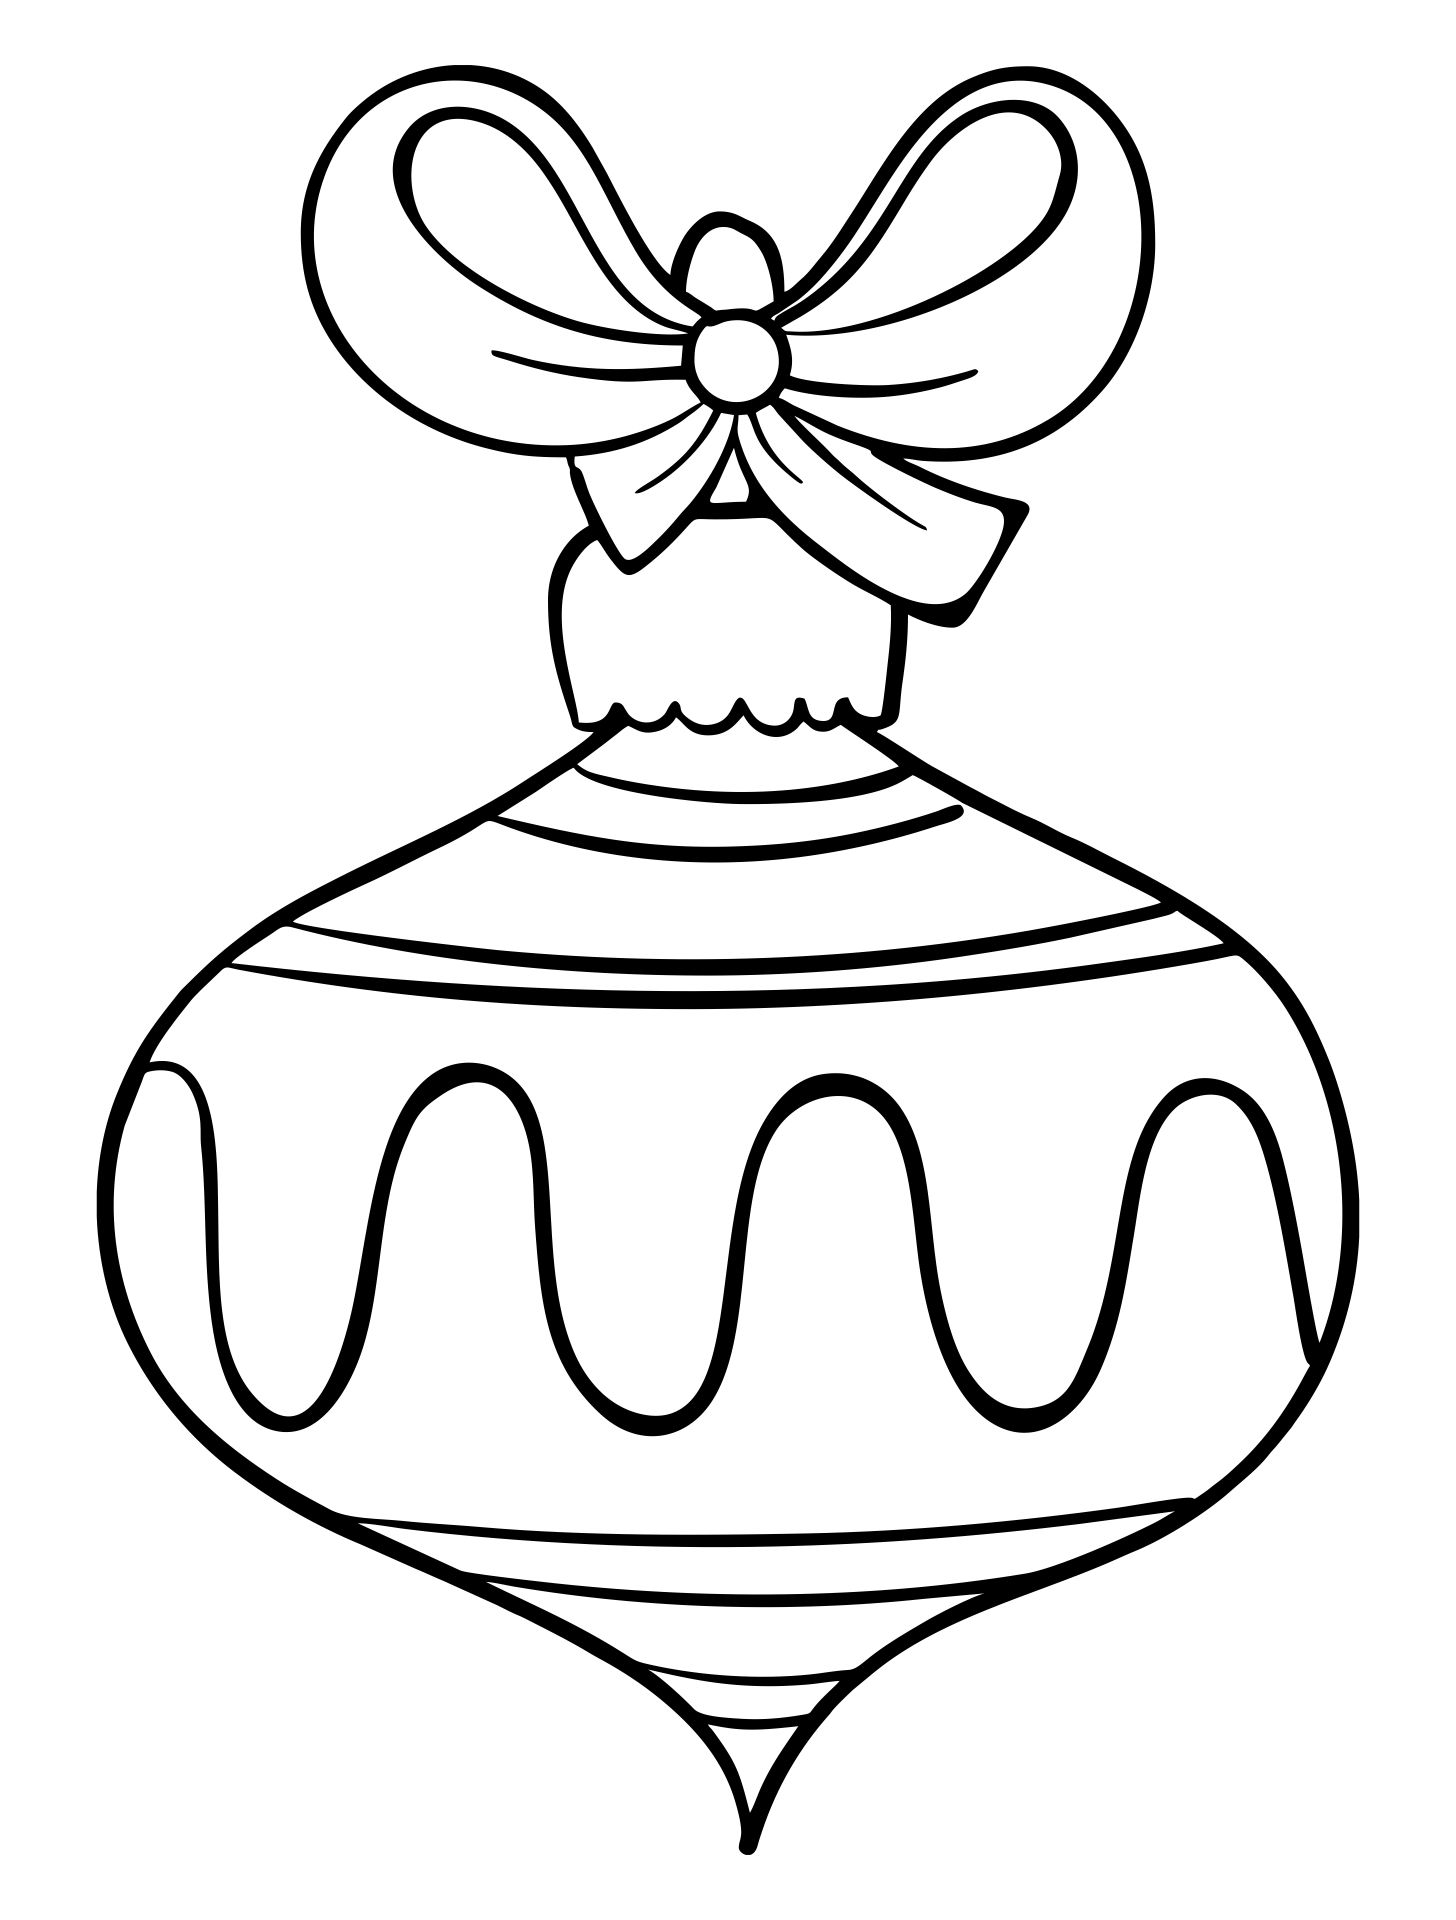 15 Best Free Christmas Printable Ornament Coloring Pages